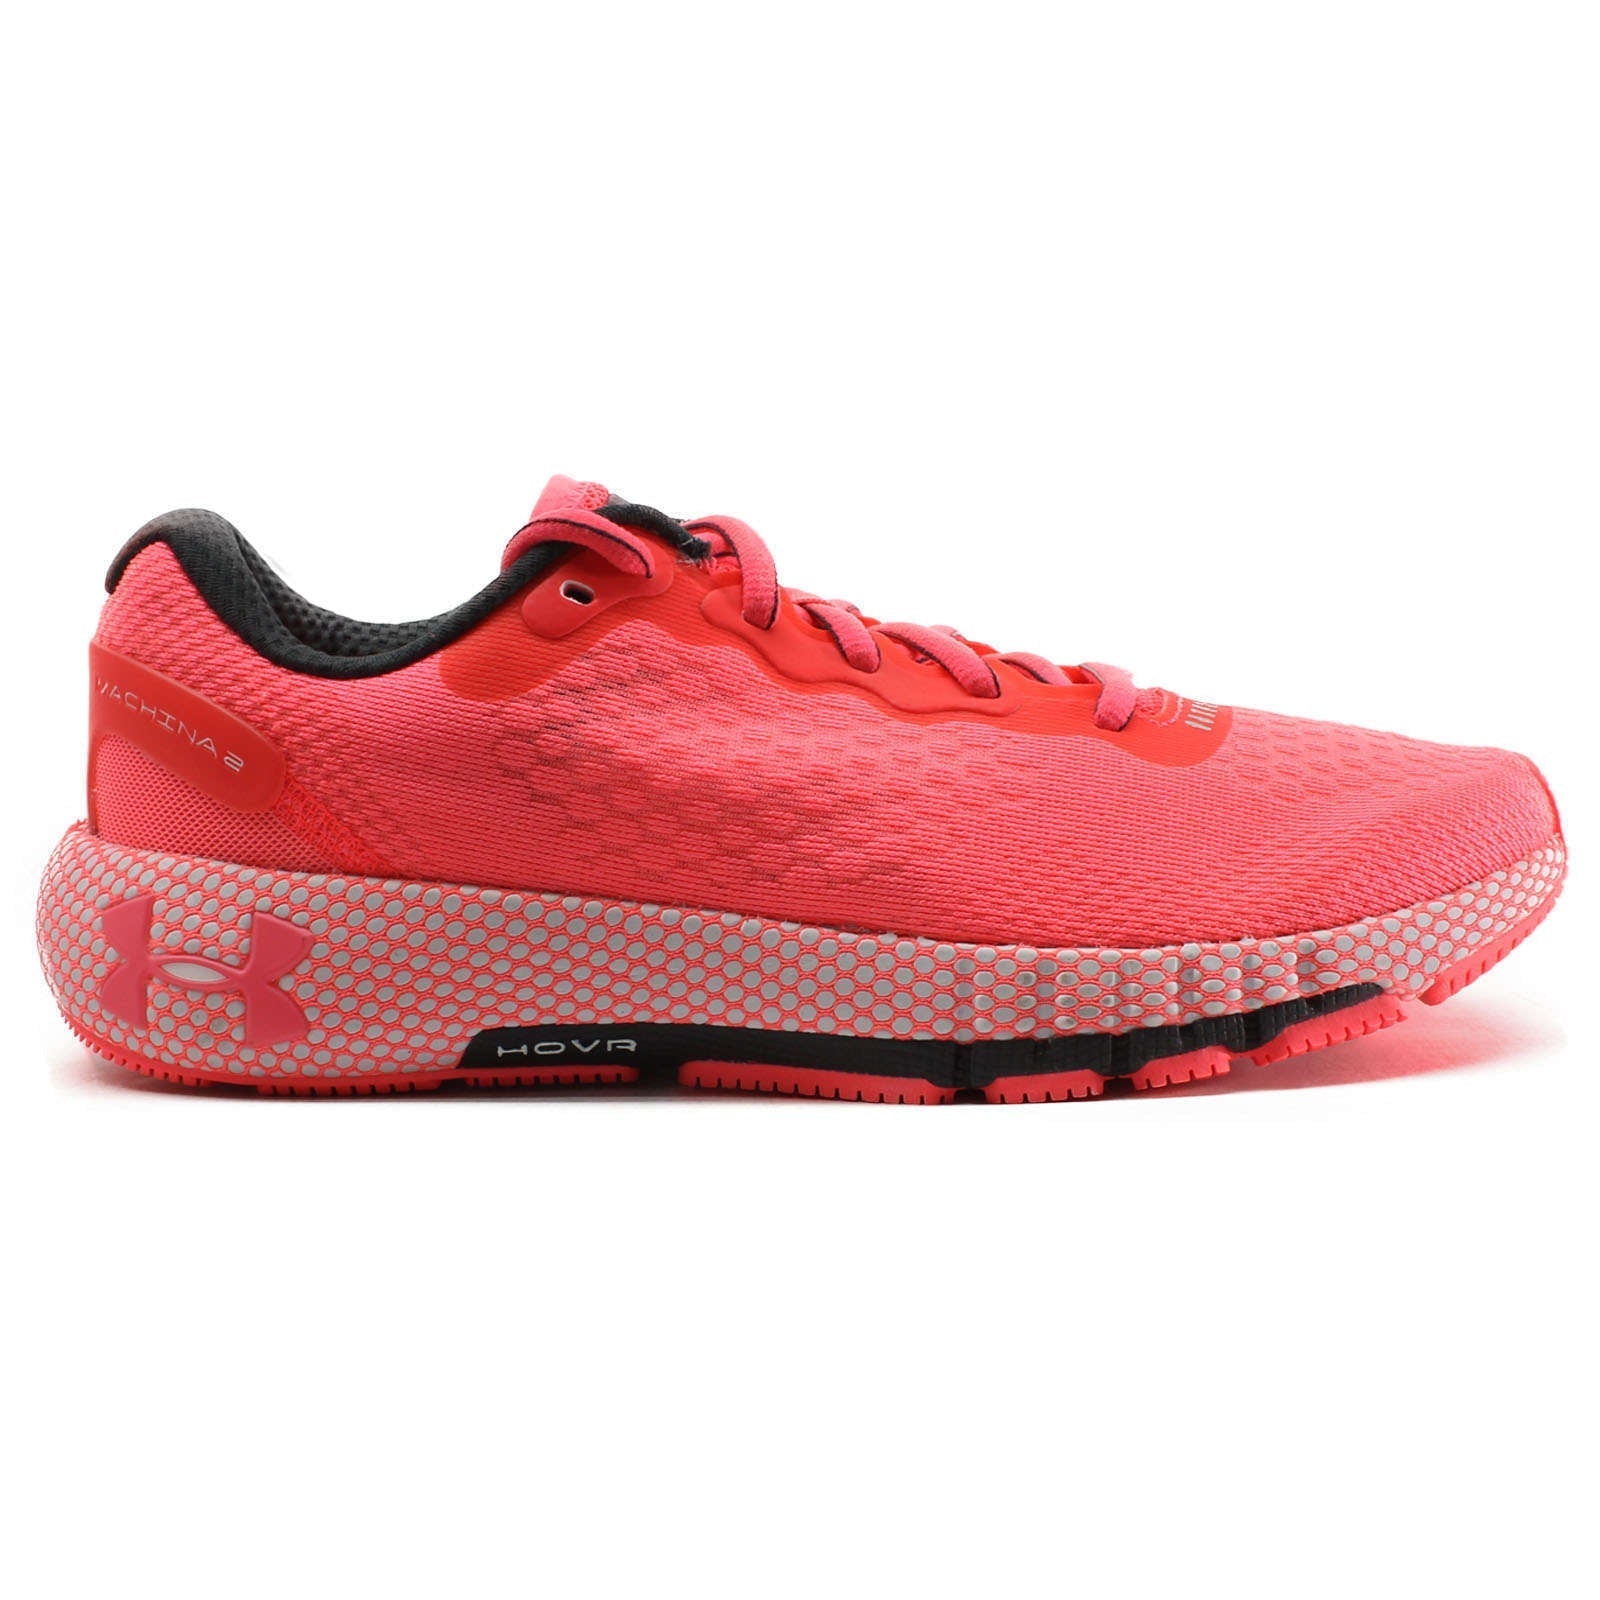 Under Armour HOVR Machina 2 Synthetic Textile Women's Low-Top Sneakers#color_pink grey